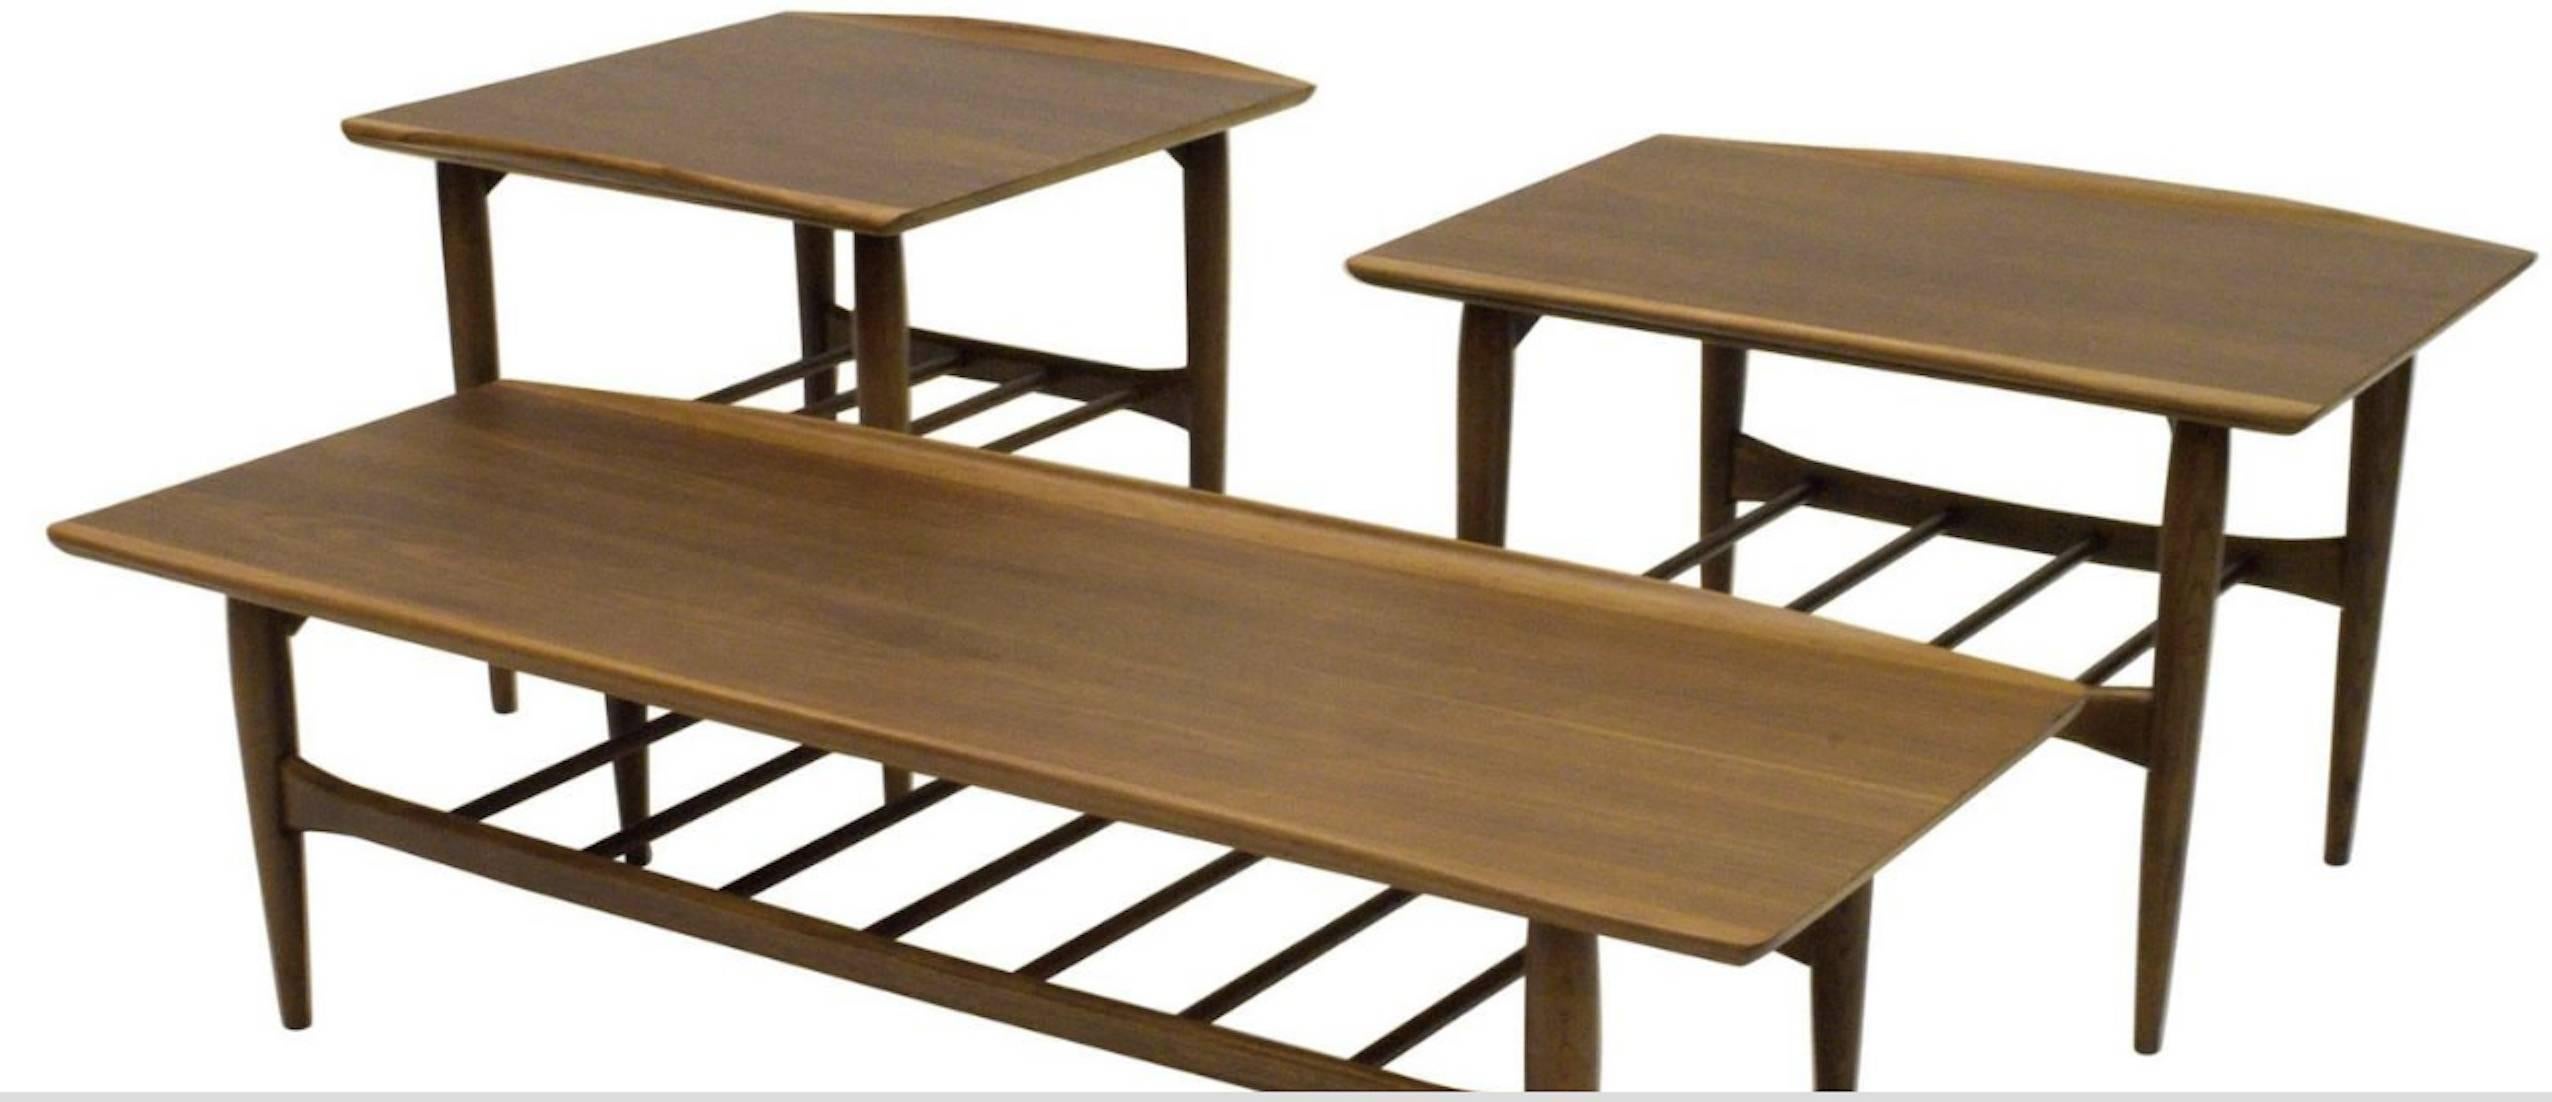 We have three available from the series tables in walnut, all with solid surfboard stylized edges and magazine rack shelfs. Each two tier table is different in measures but all feature a magazine rack shelf as well raised edges typical of Danish